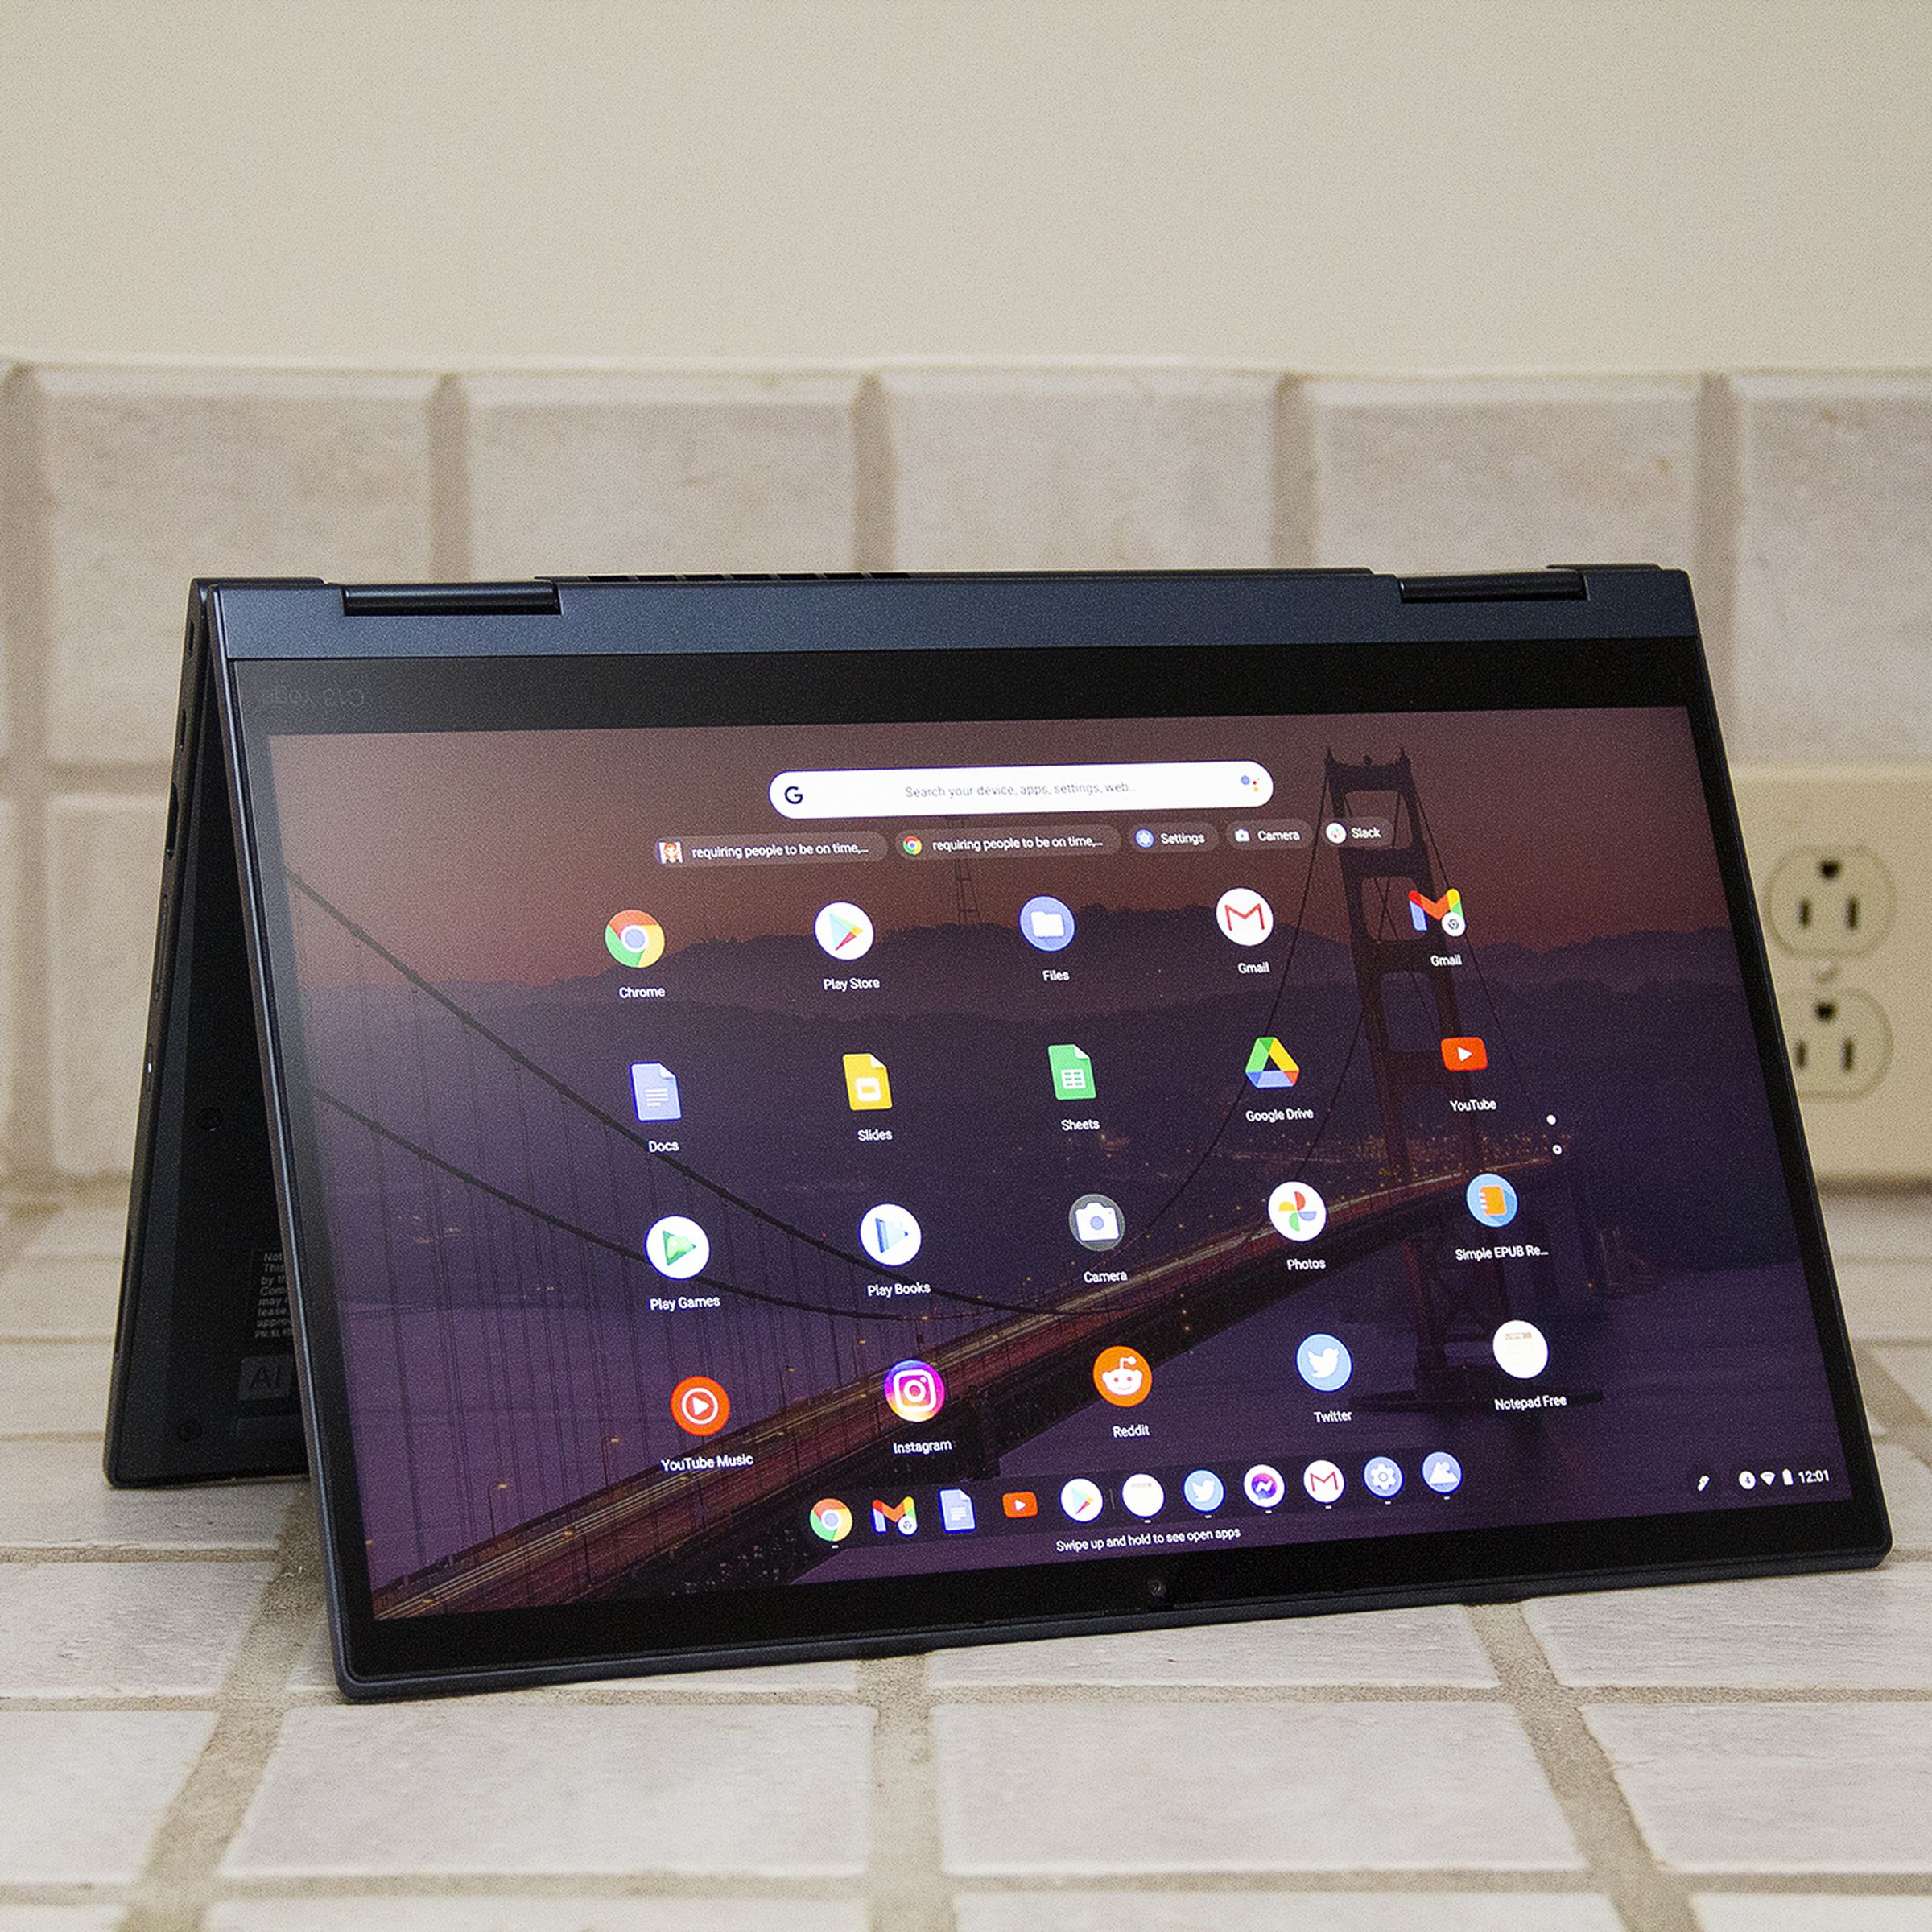 The ThinkPad C13 Yoga Chromebook in tent mode. The screen displays a grid of Android apps.